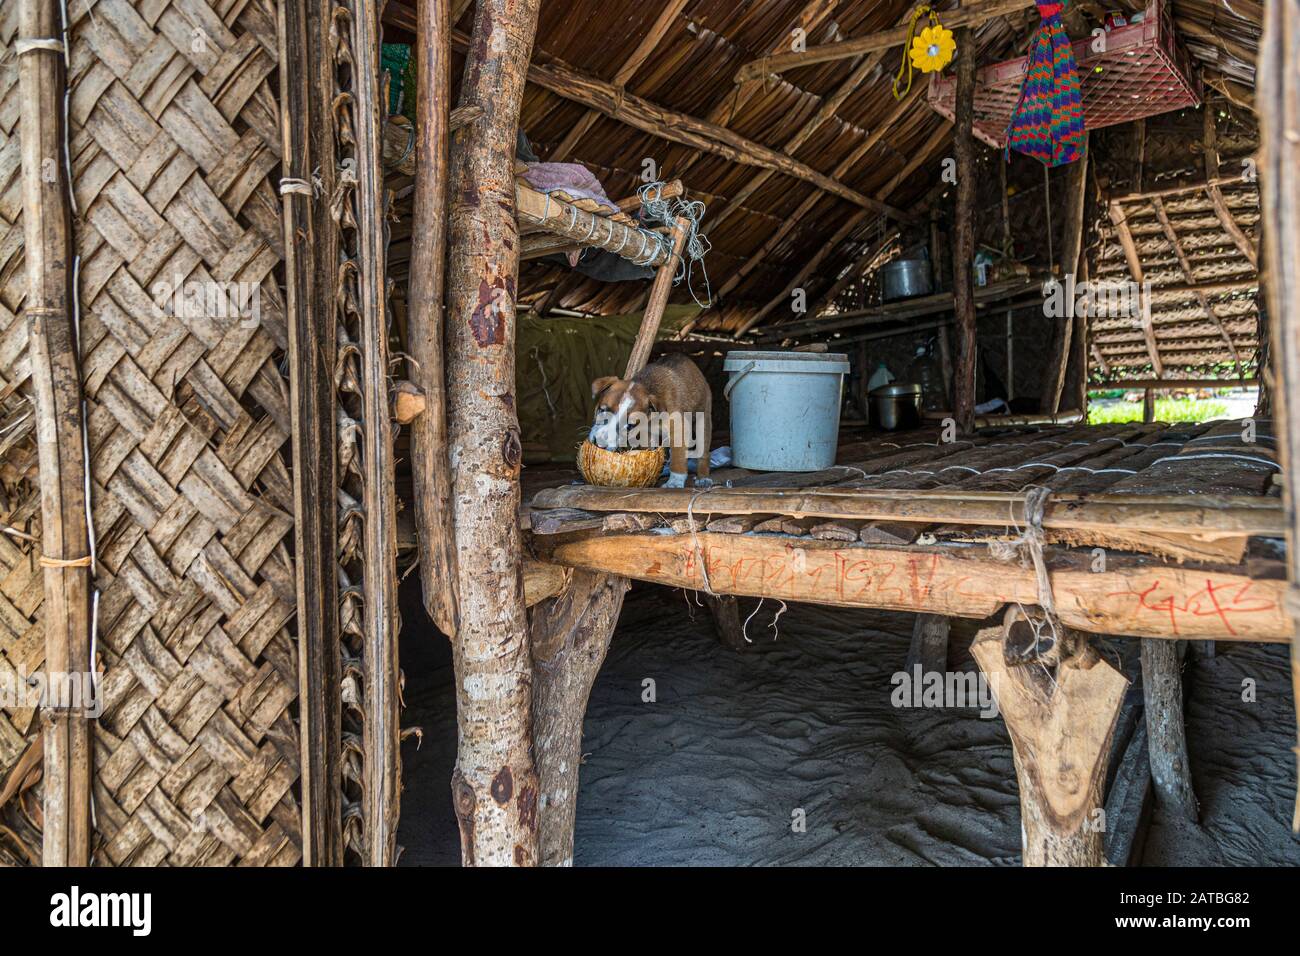 Little Dog in typical Hut of Papua New Guinea Stock Photo